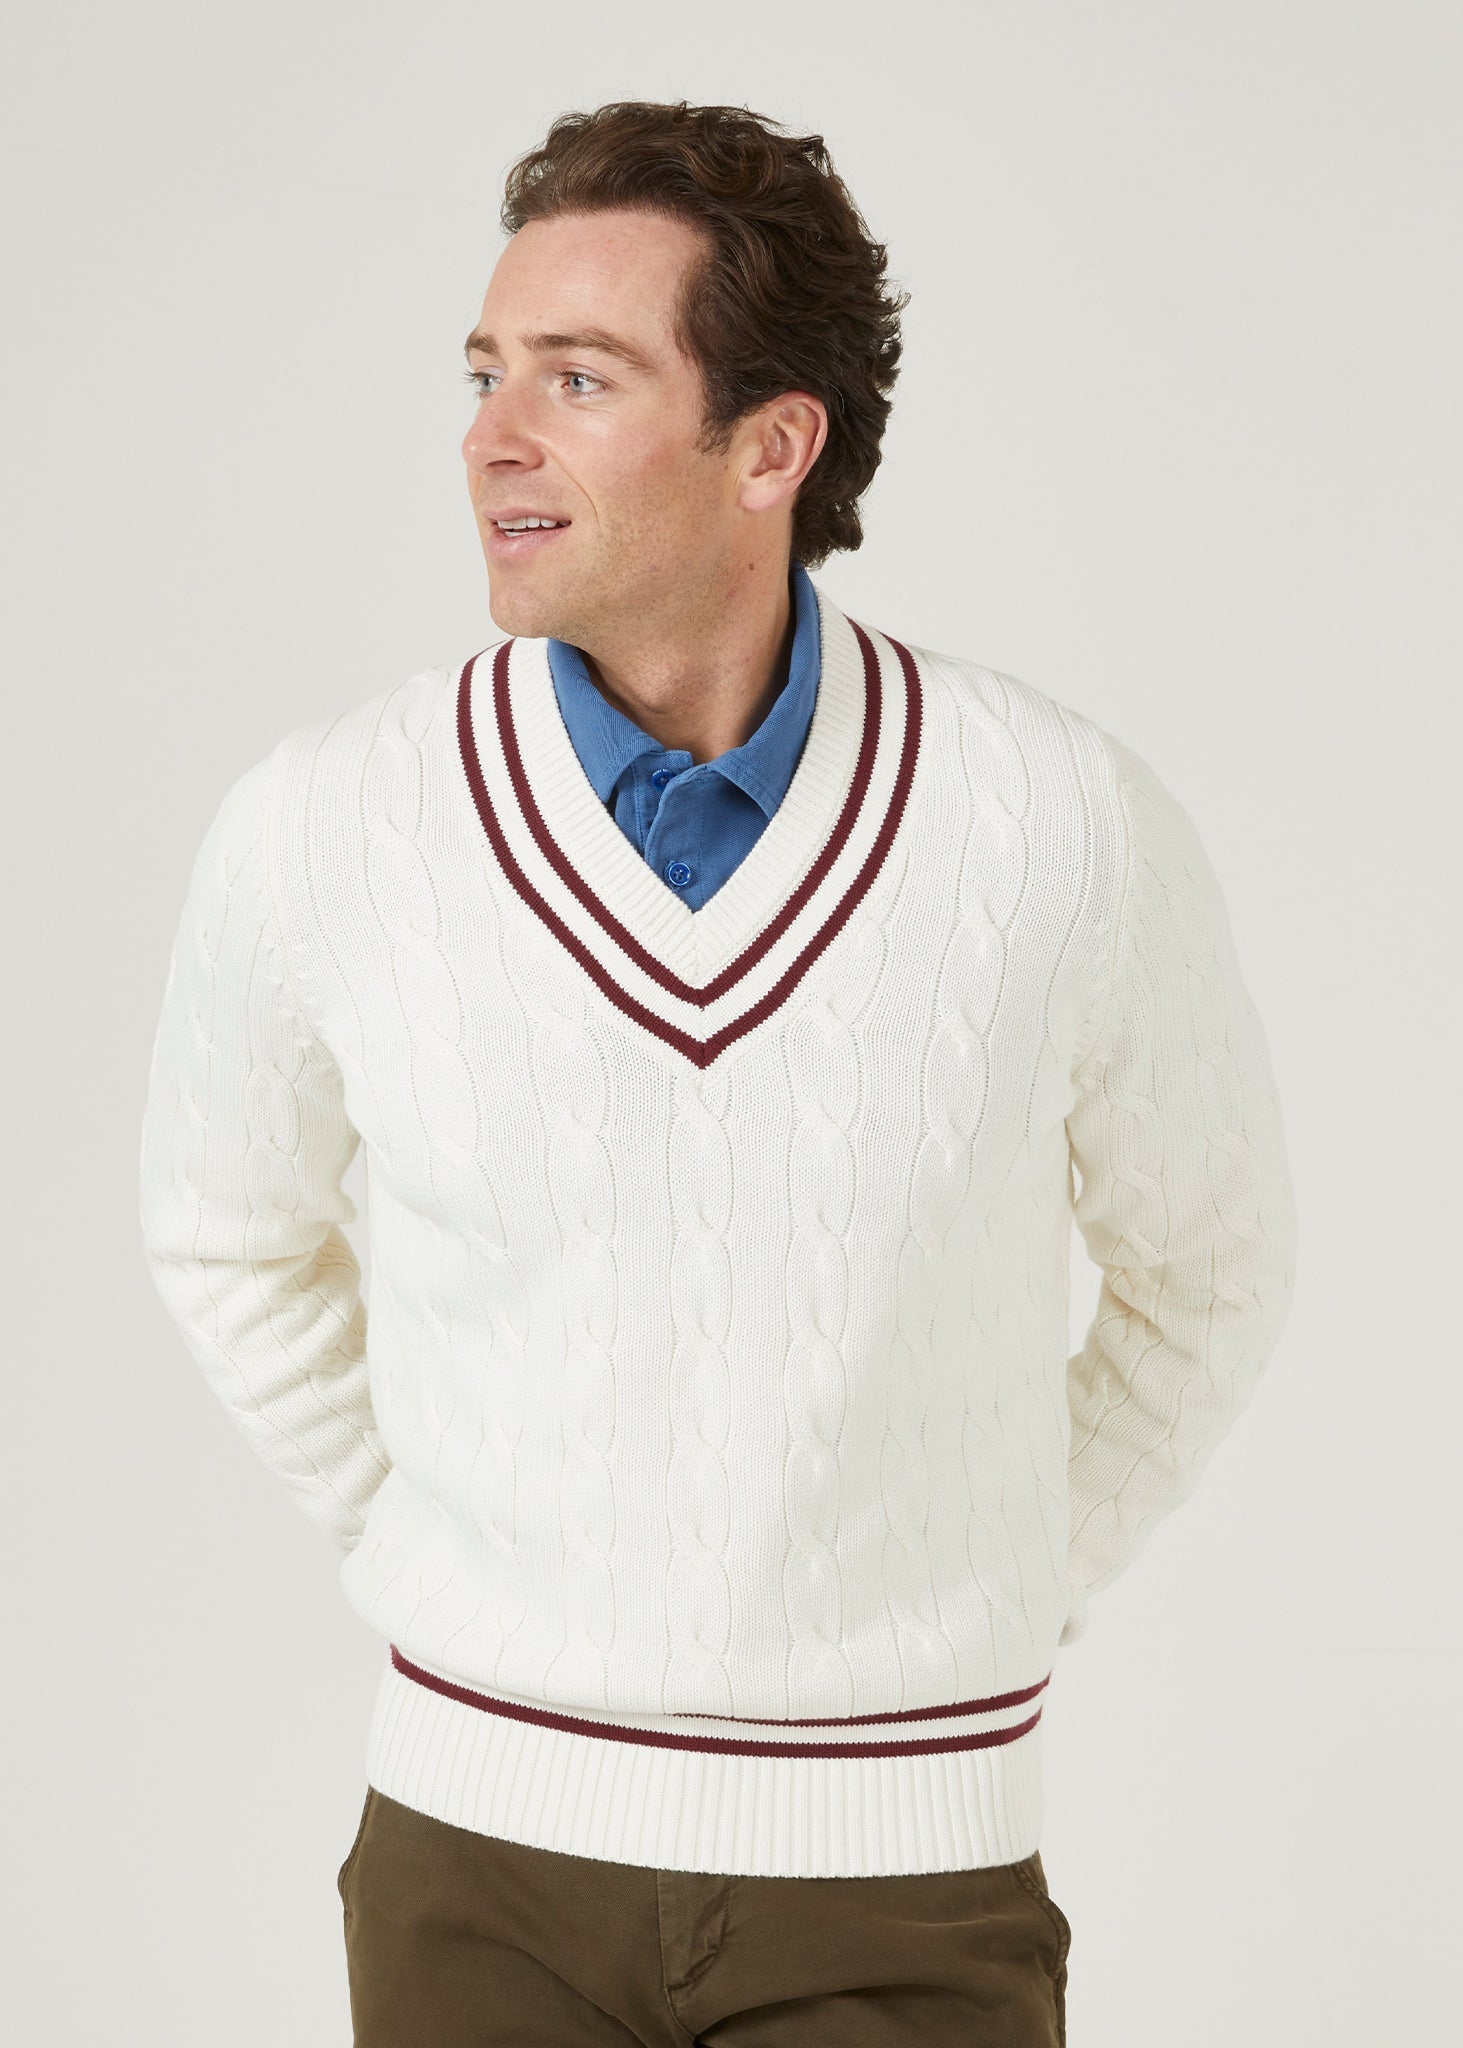 Ecru cricket jumper with a claret red trim and cable knit design.